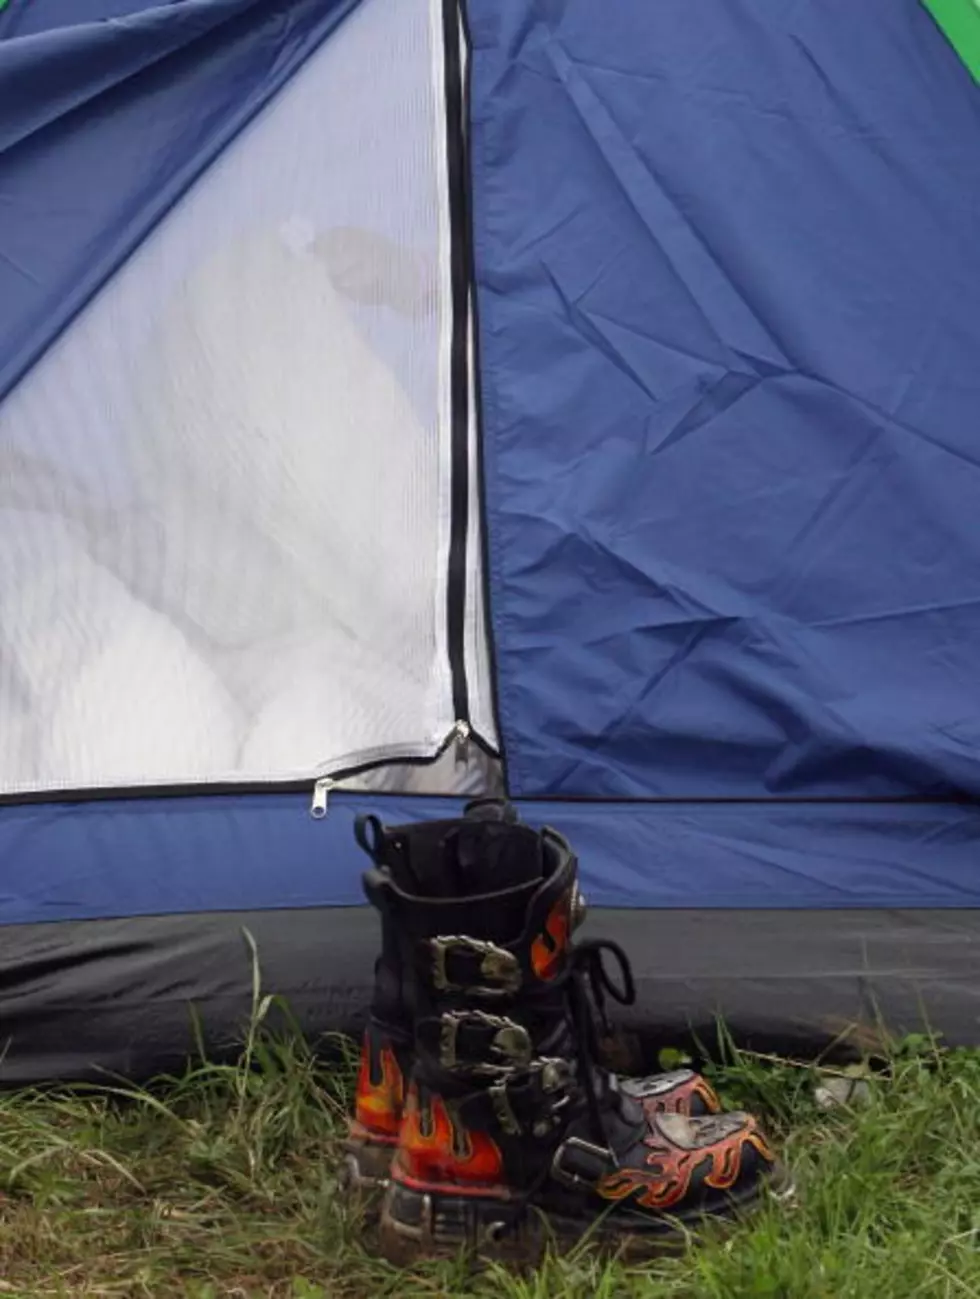 Why You Should Go to ROTR – Camping